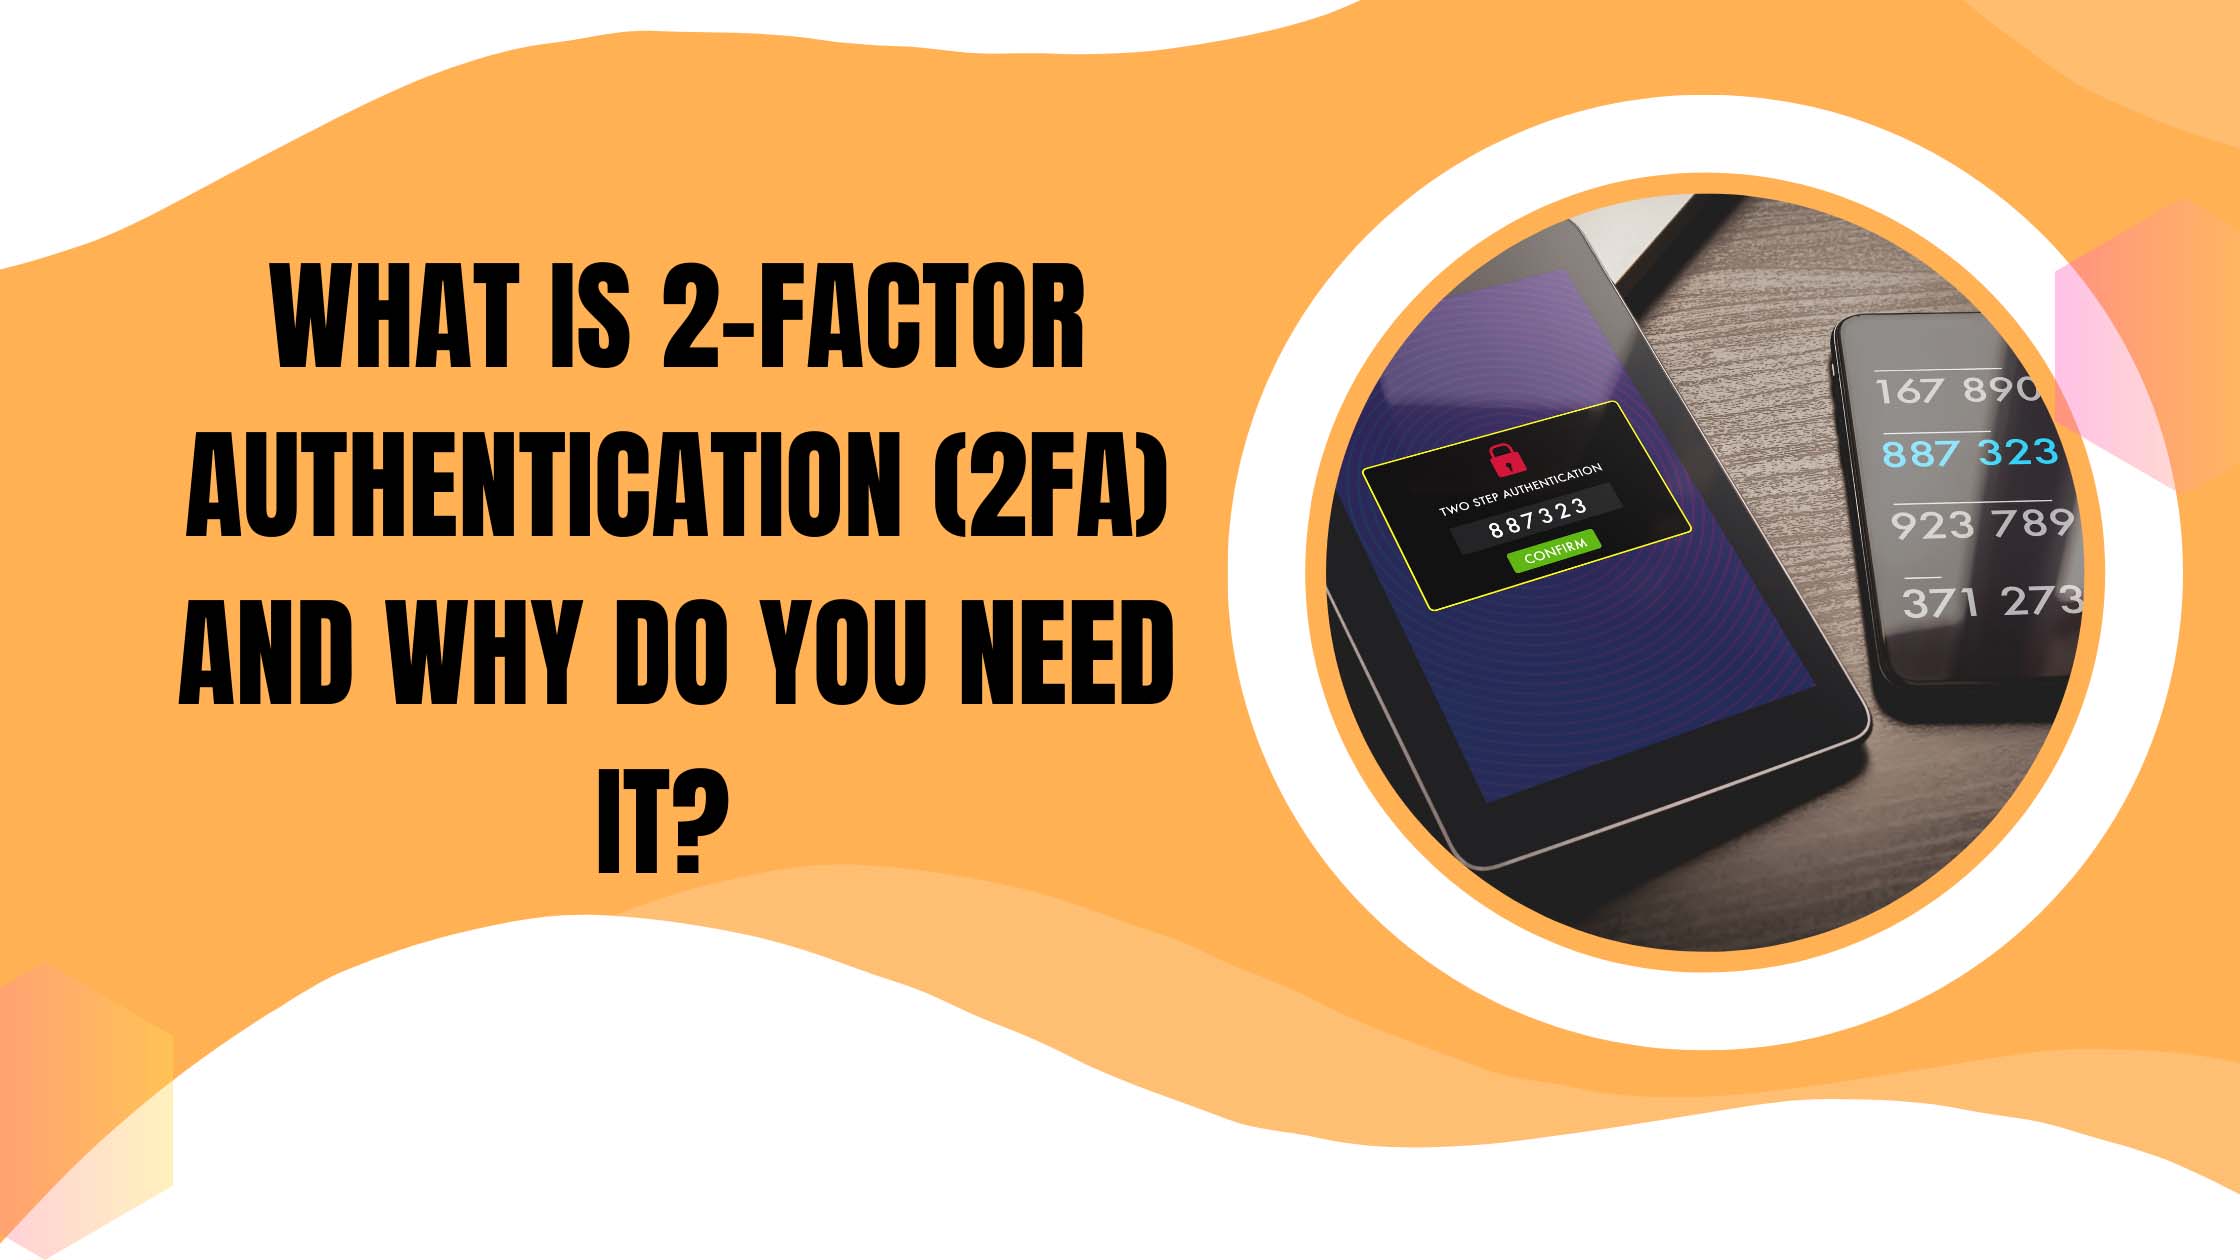 What is 2-Factor Authentication and Why Do You Need It?